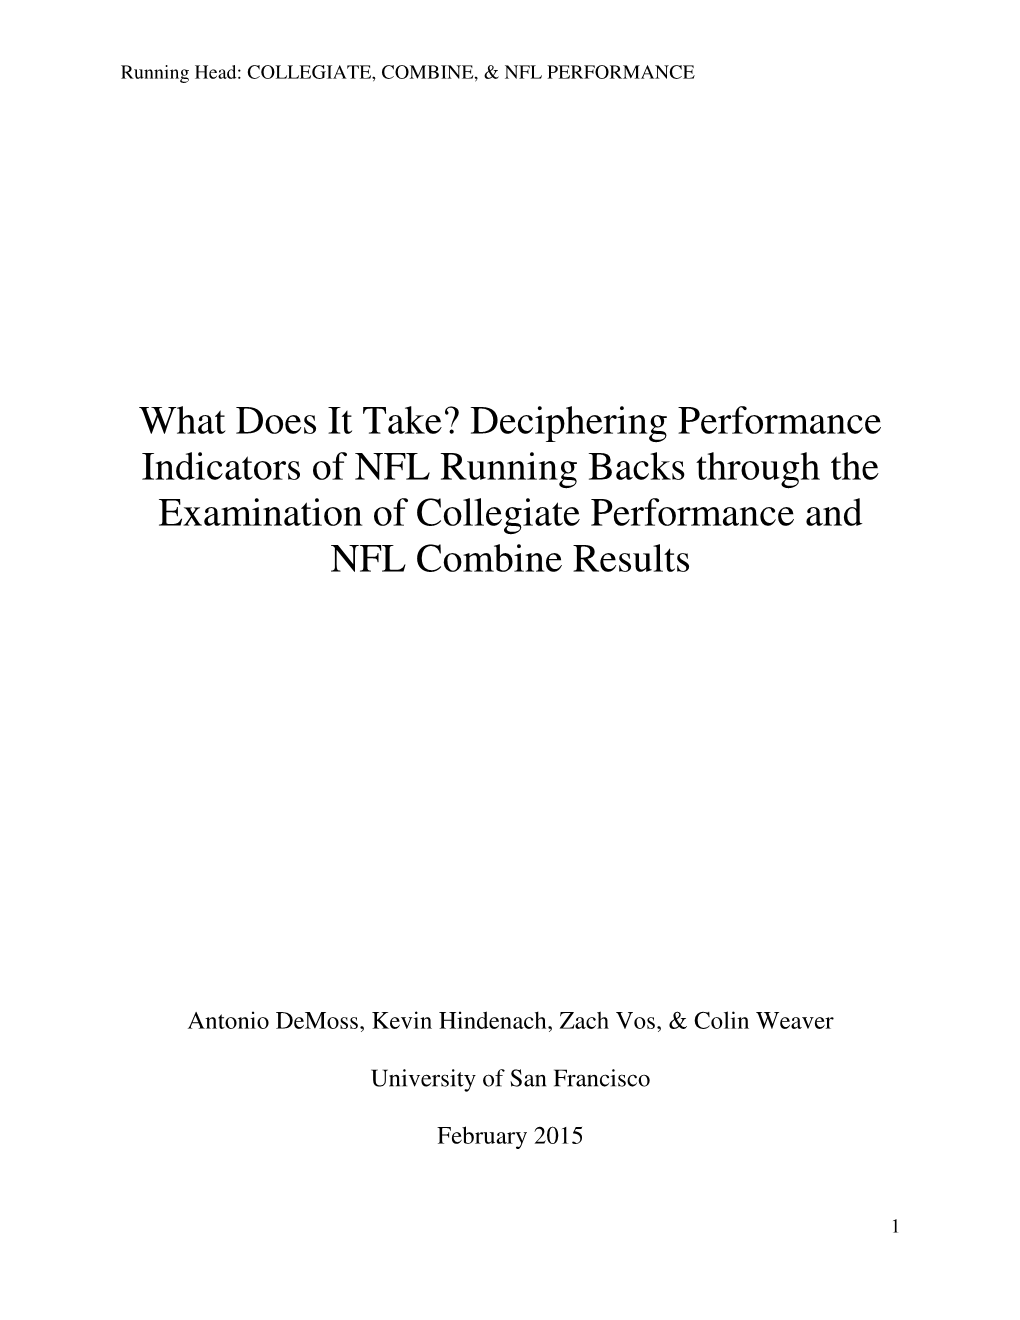 Deciphering Performance Indicators of NFL Running Backs Through the Examination of Collegiate Performance and NFL Combine Results